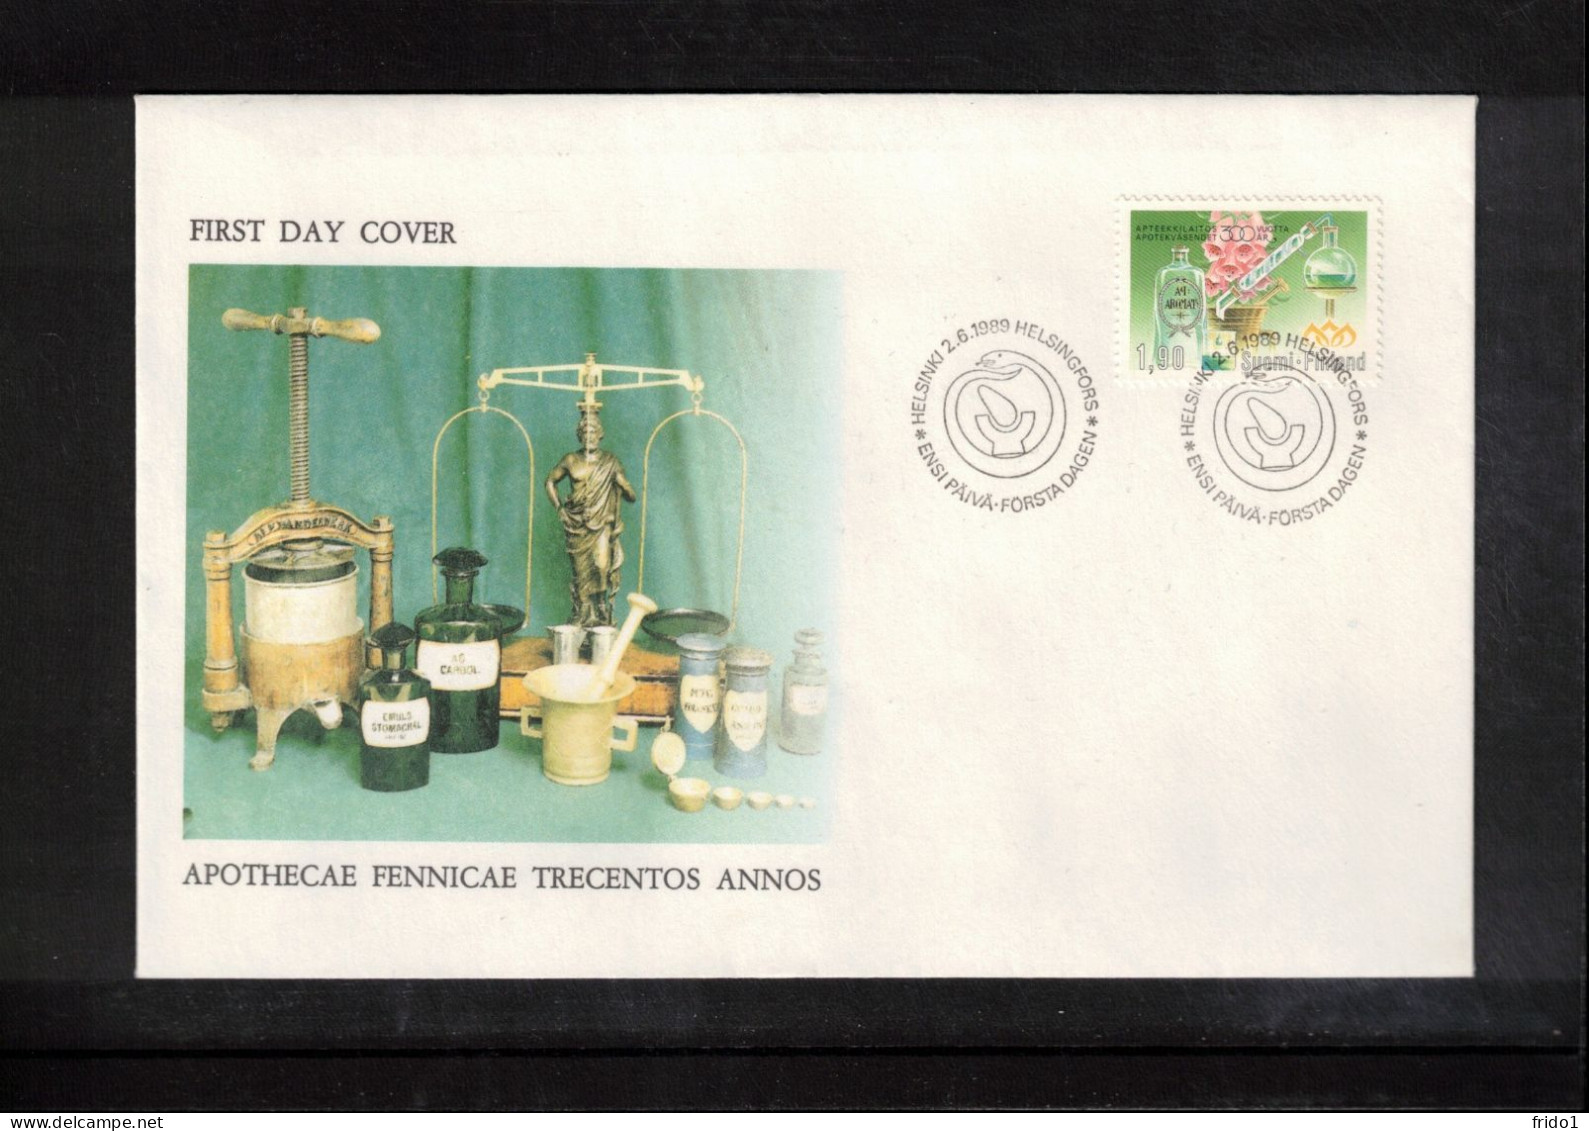 Finland 1989 300 Years Of Pharmacies In Finland FDC - Pharmacy